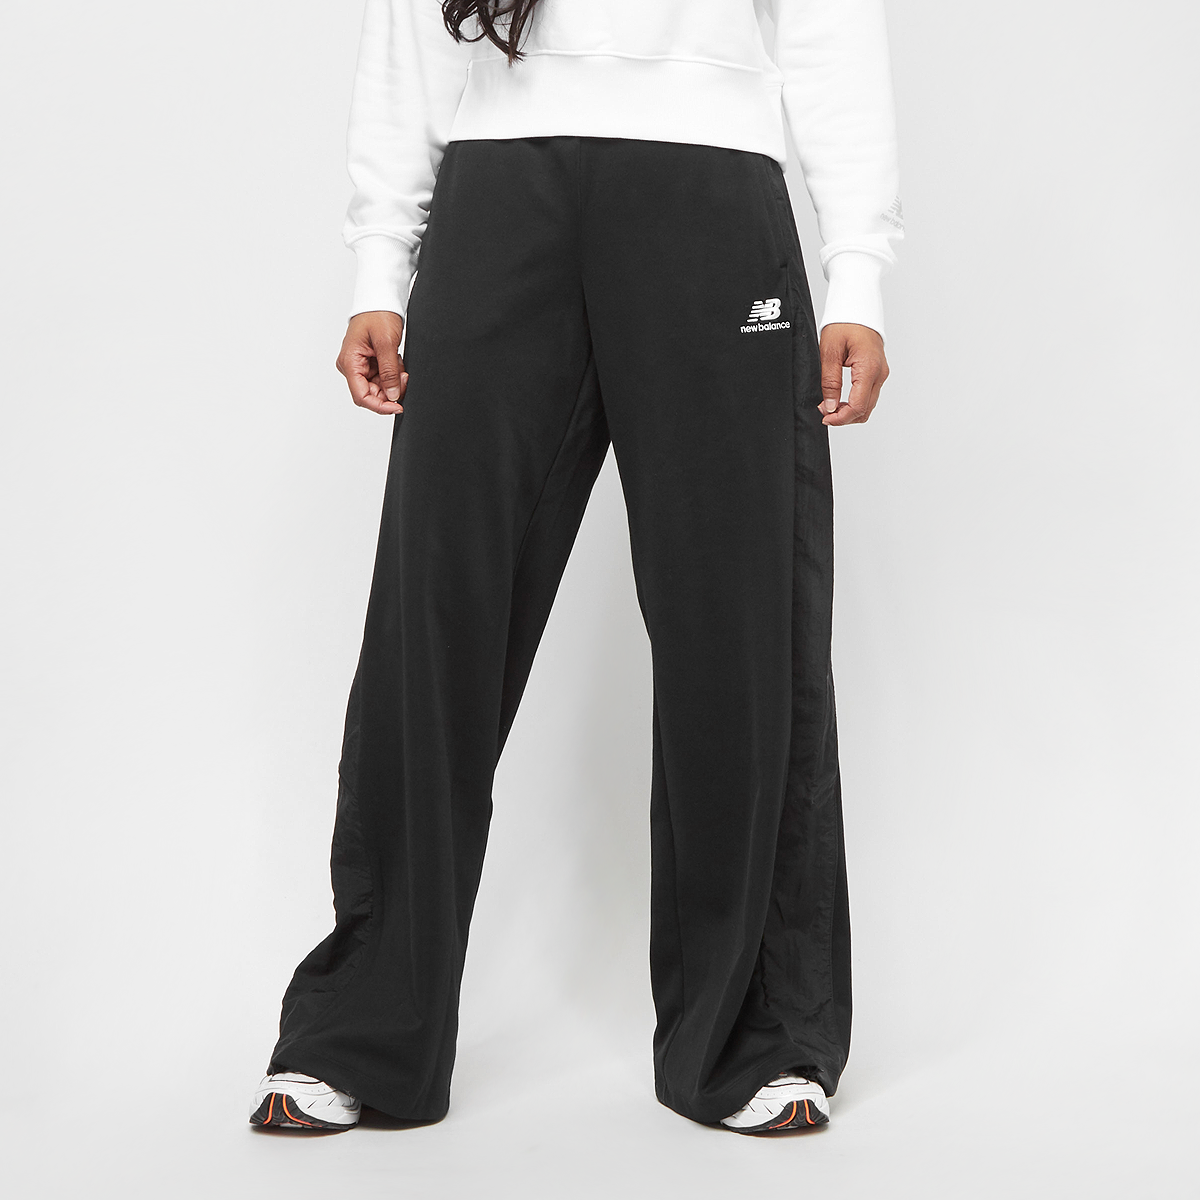 Athletics Amplified Pant